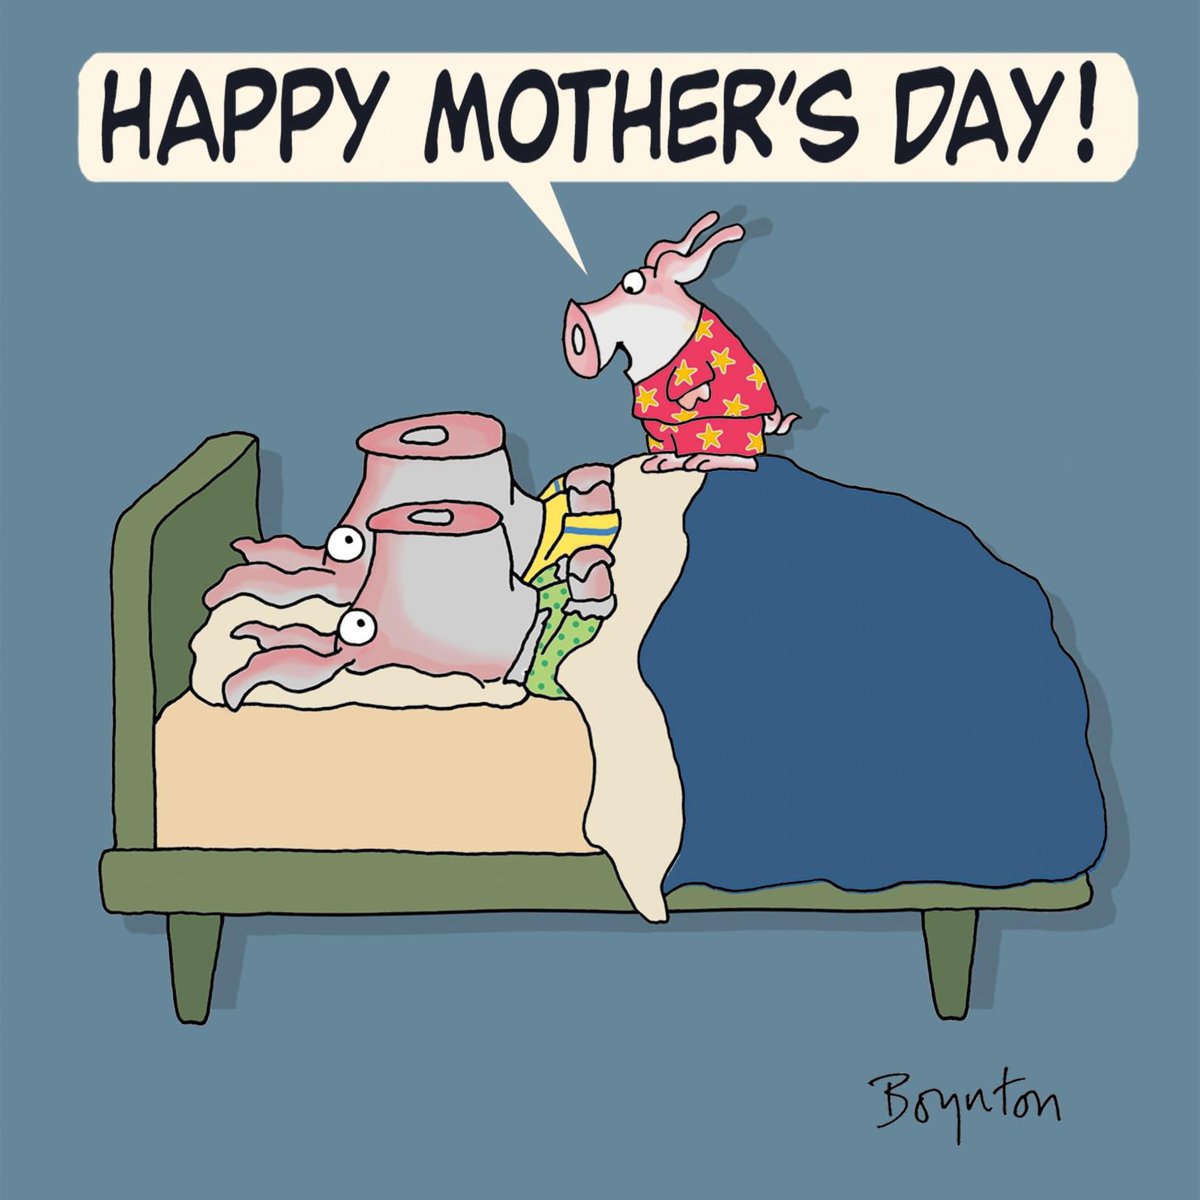 Happy Mothers Day to all the Moms